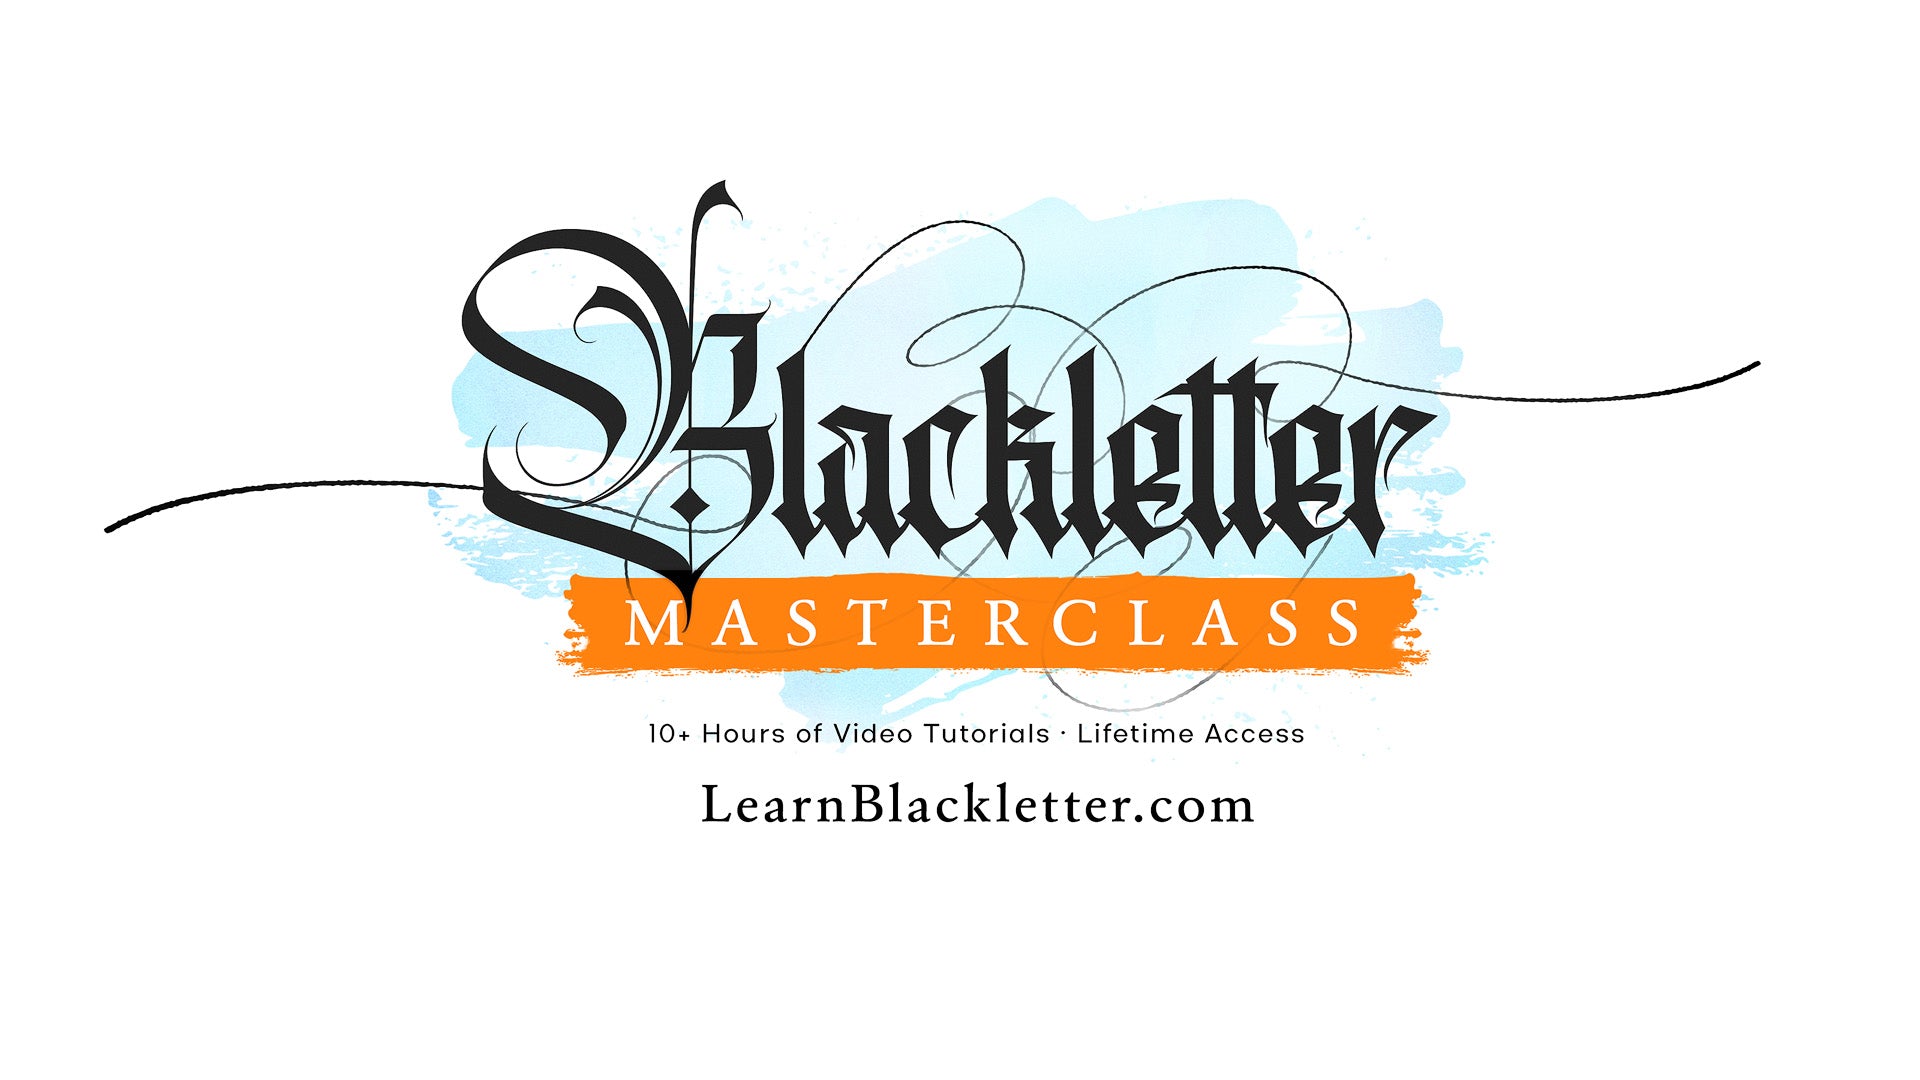 The Blackletter Masterclass